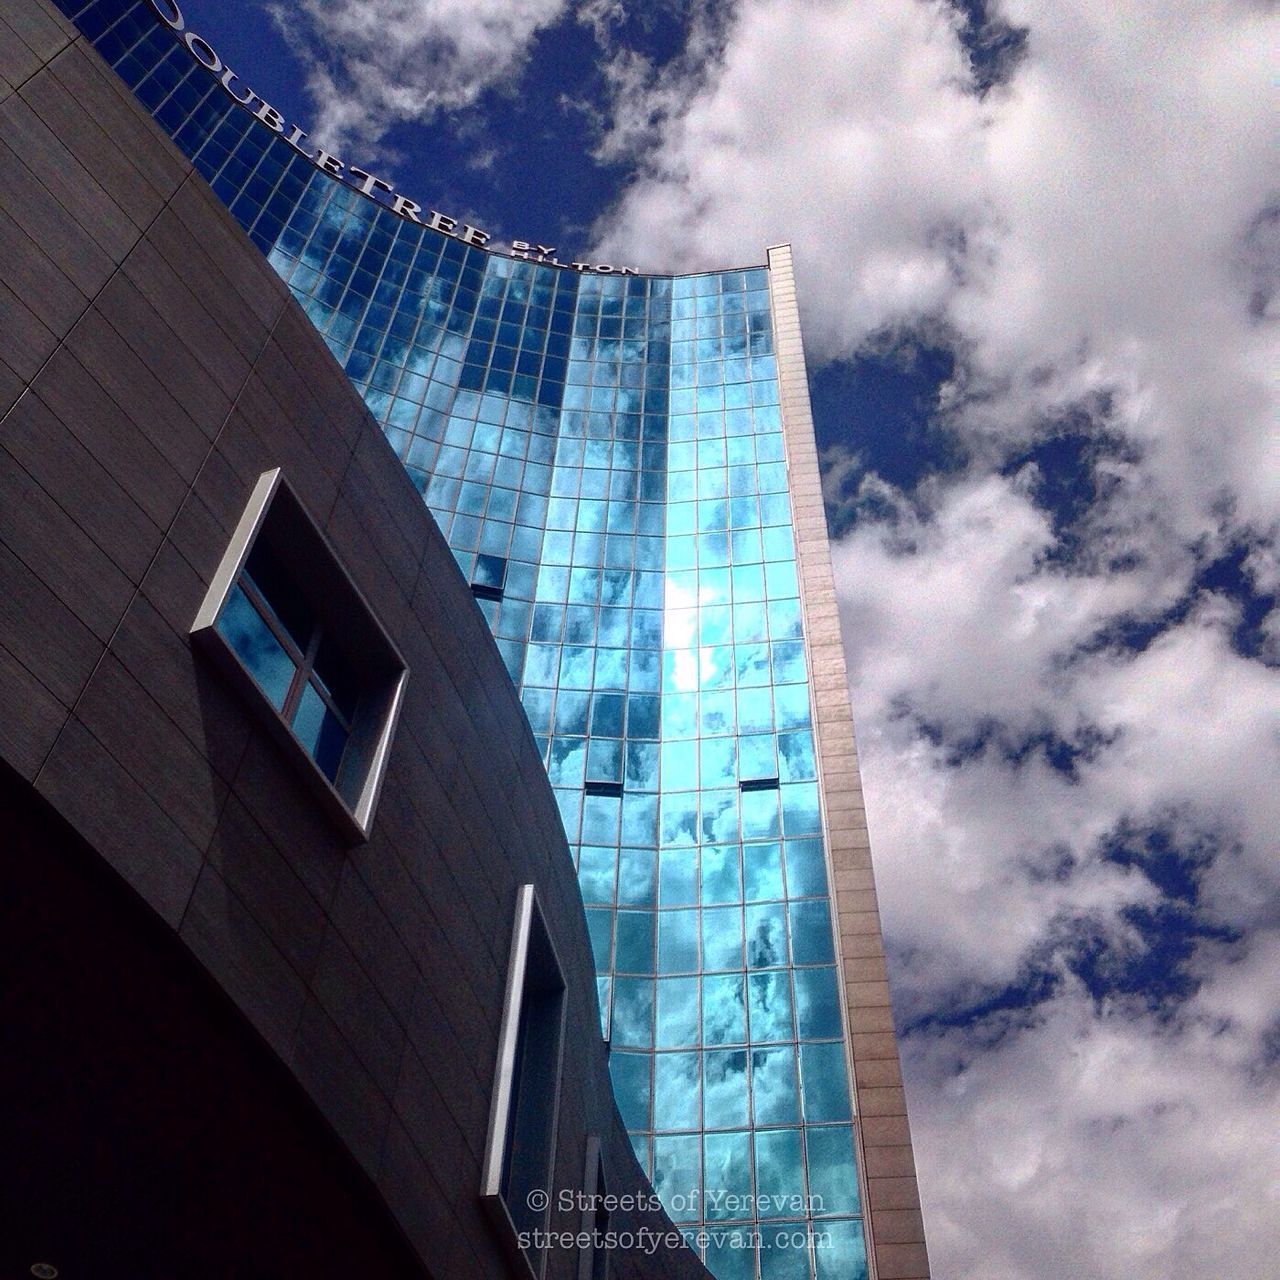 architecture, low angle view, built structure, building exterior, sky, modern, cloud - sky, office building, city, tall - high, skyscraper, building, cloudy, tower, cloud, glass - material, reflection, day, outdoors, no people